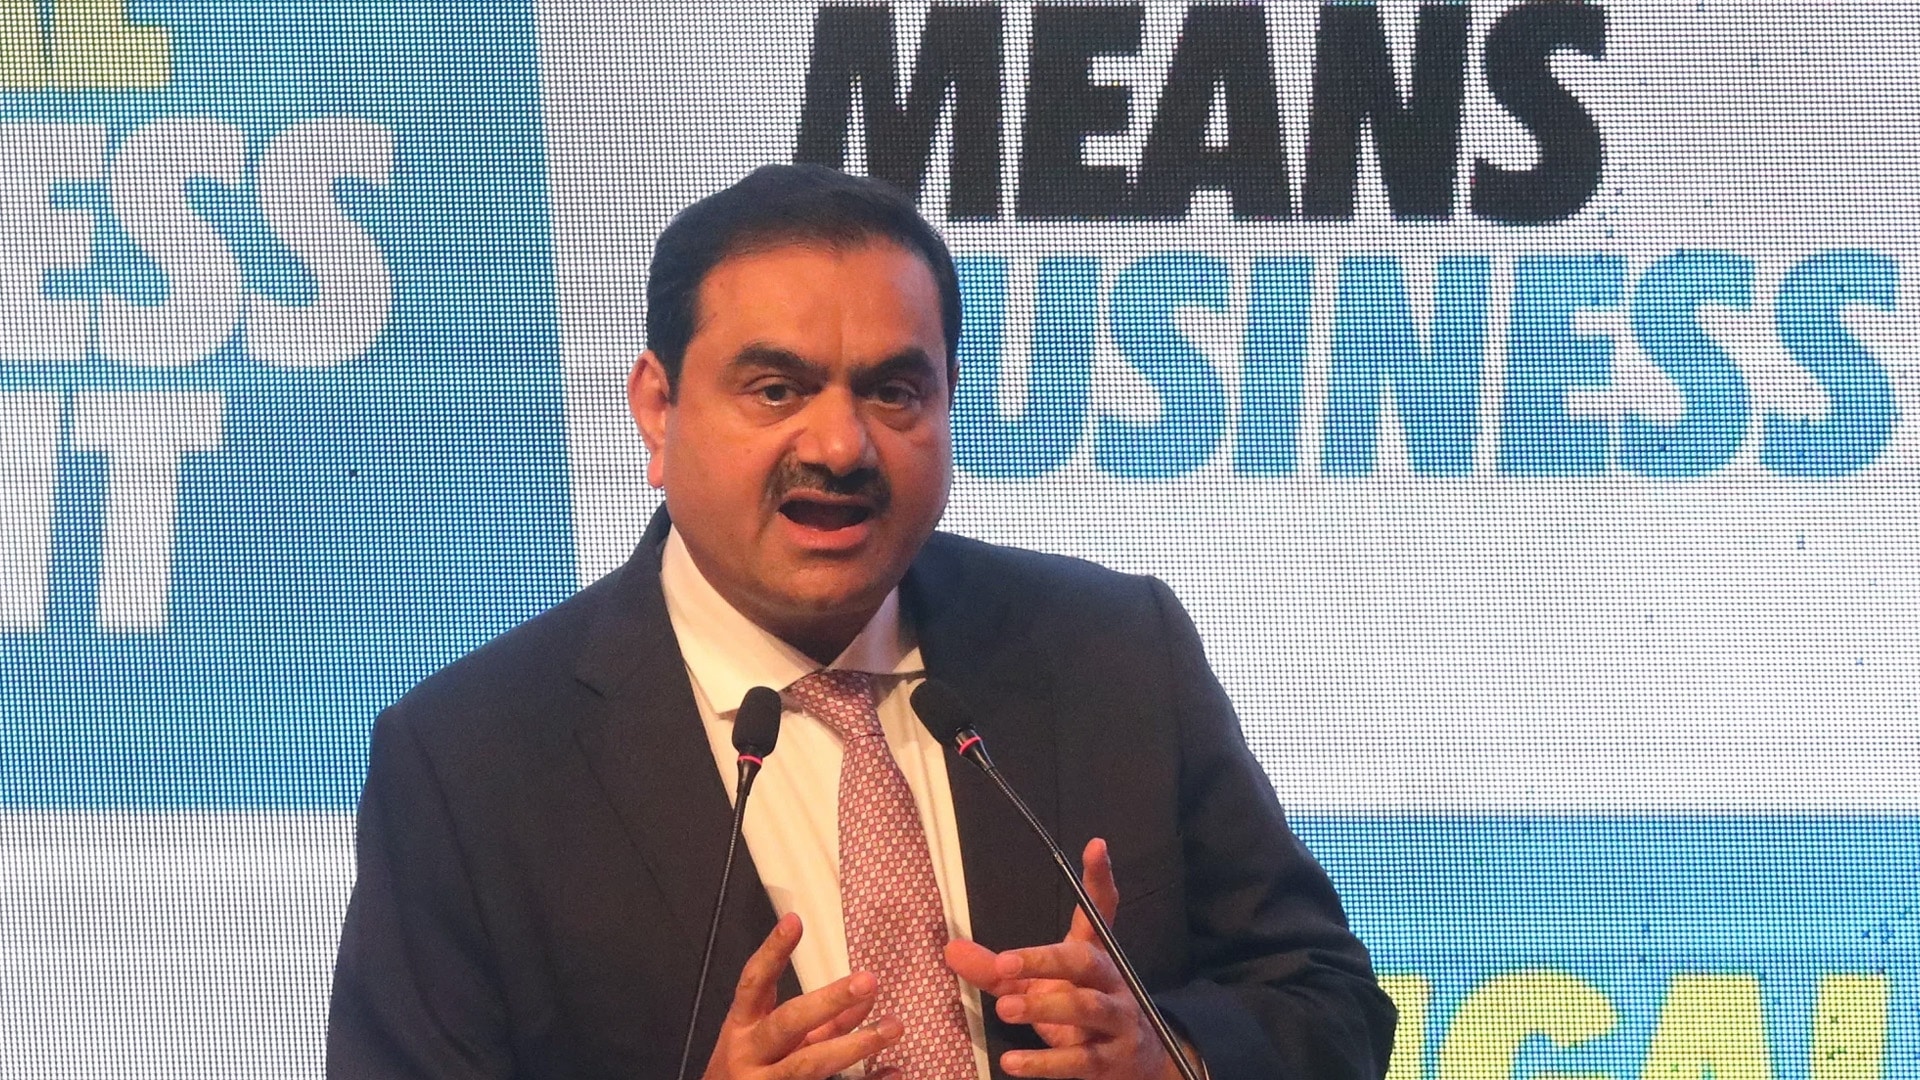 Adani confident of FPO sailing through; SEBI, other regulatory bodies probing sell-off